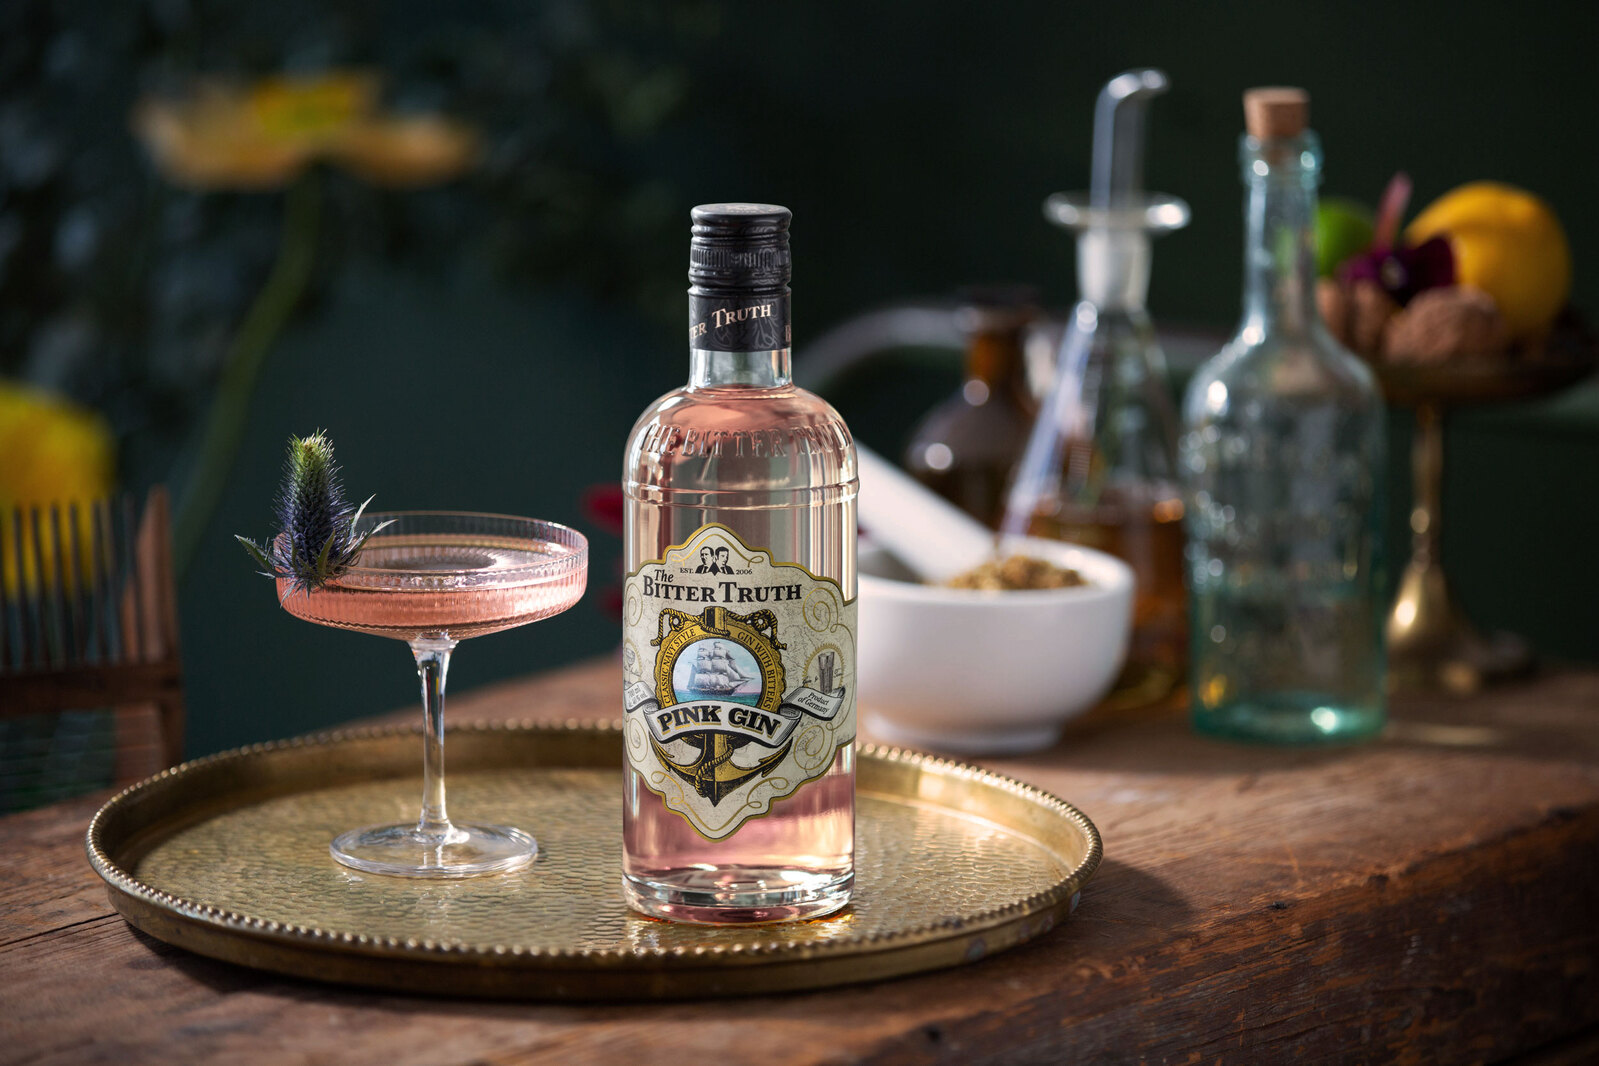 | Bitters Bitter Only | The Truth Pink Gin